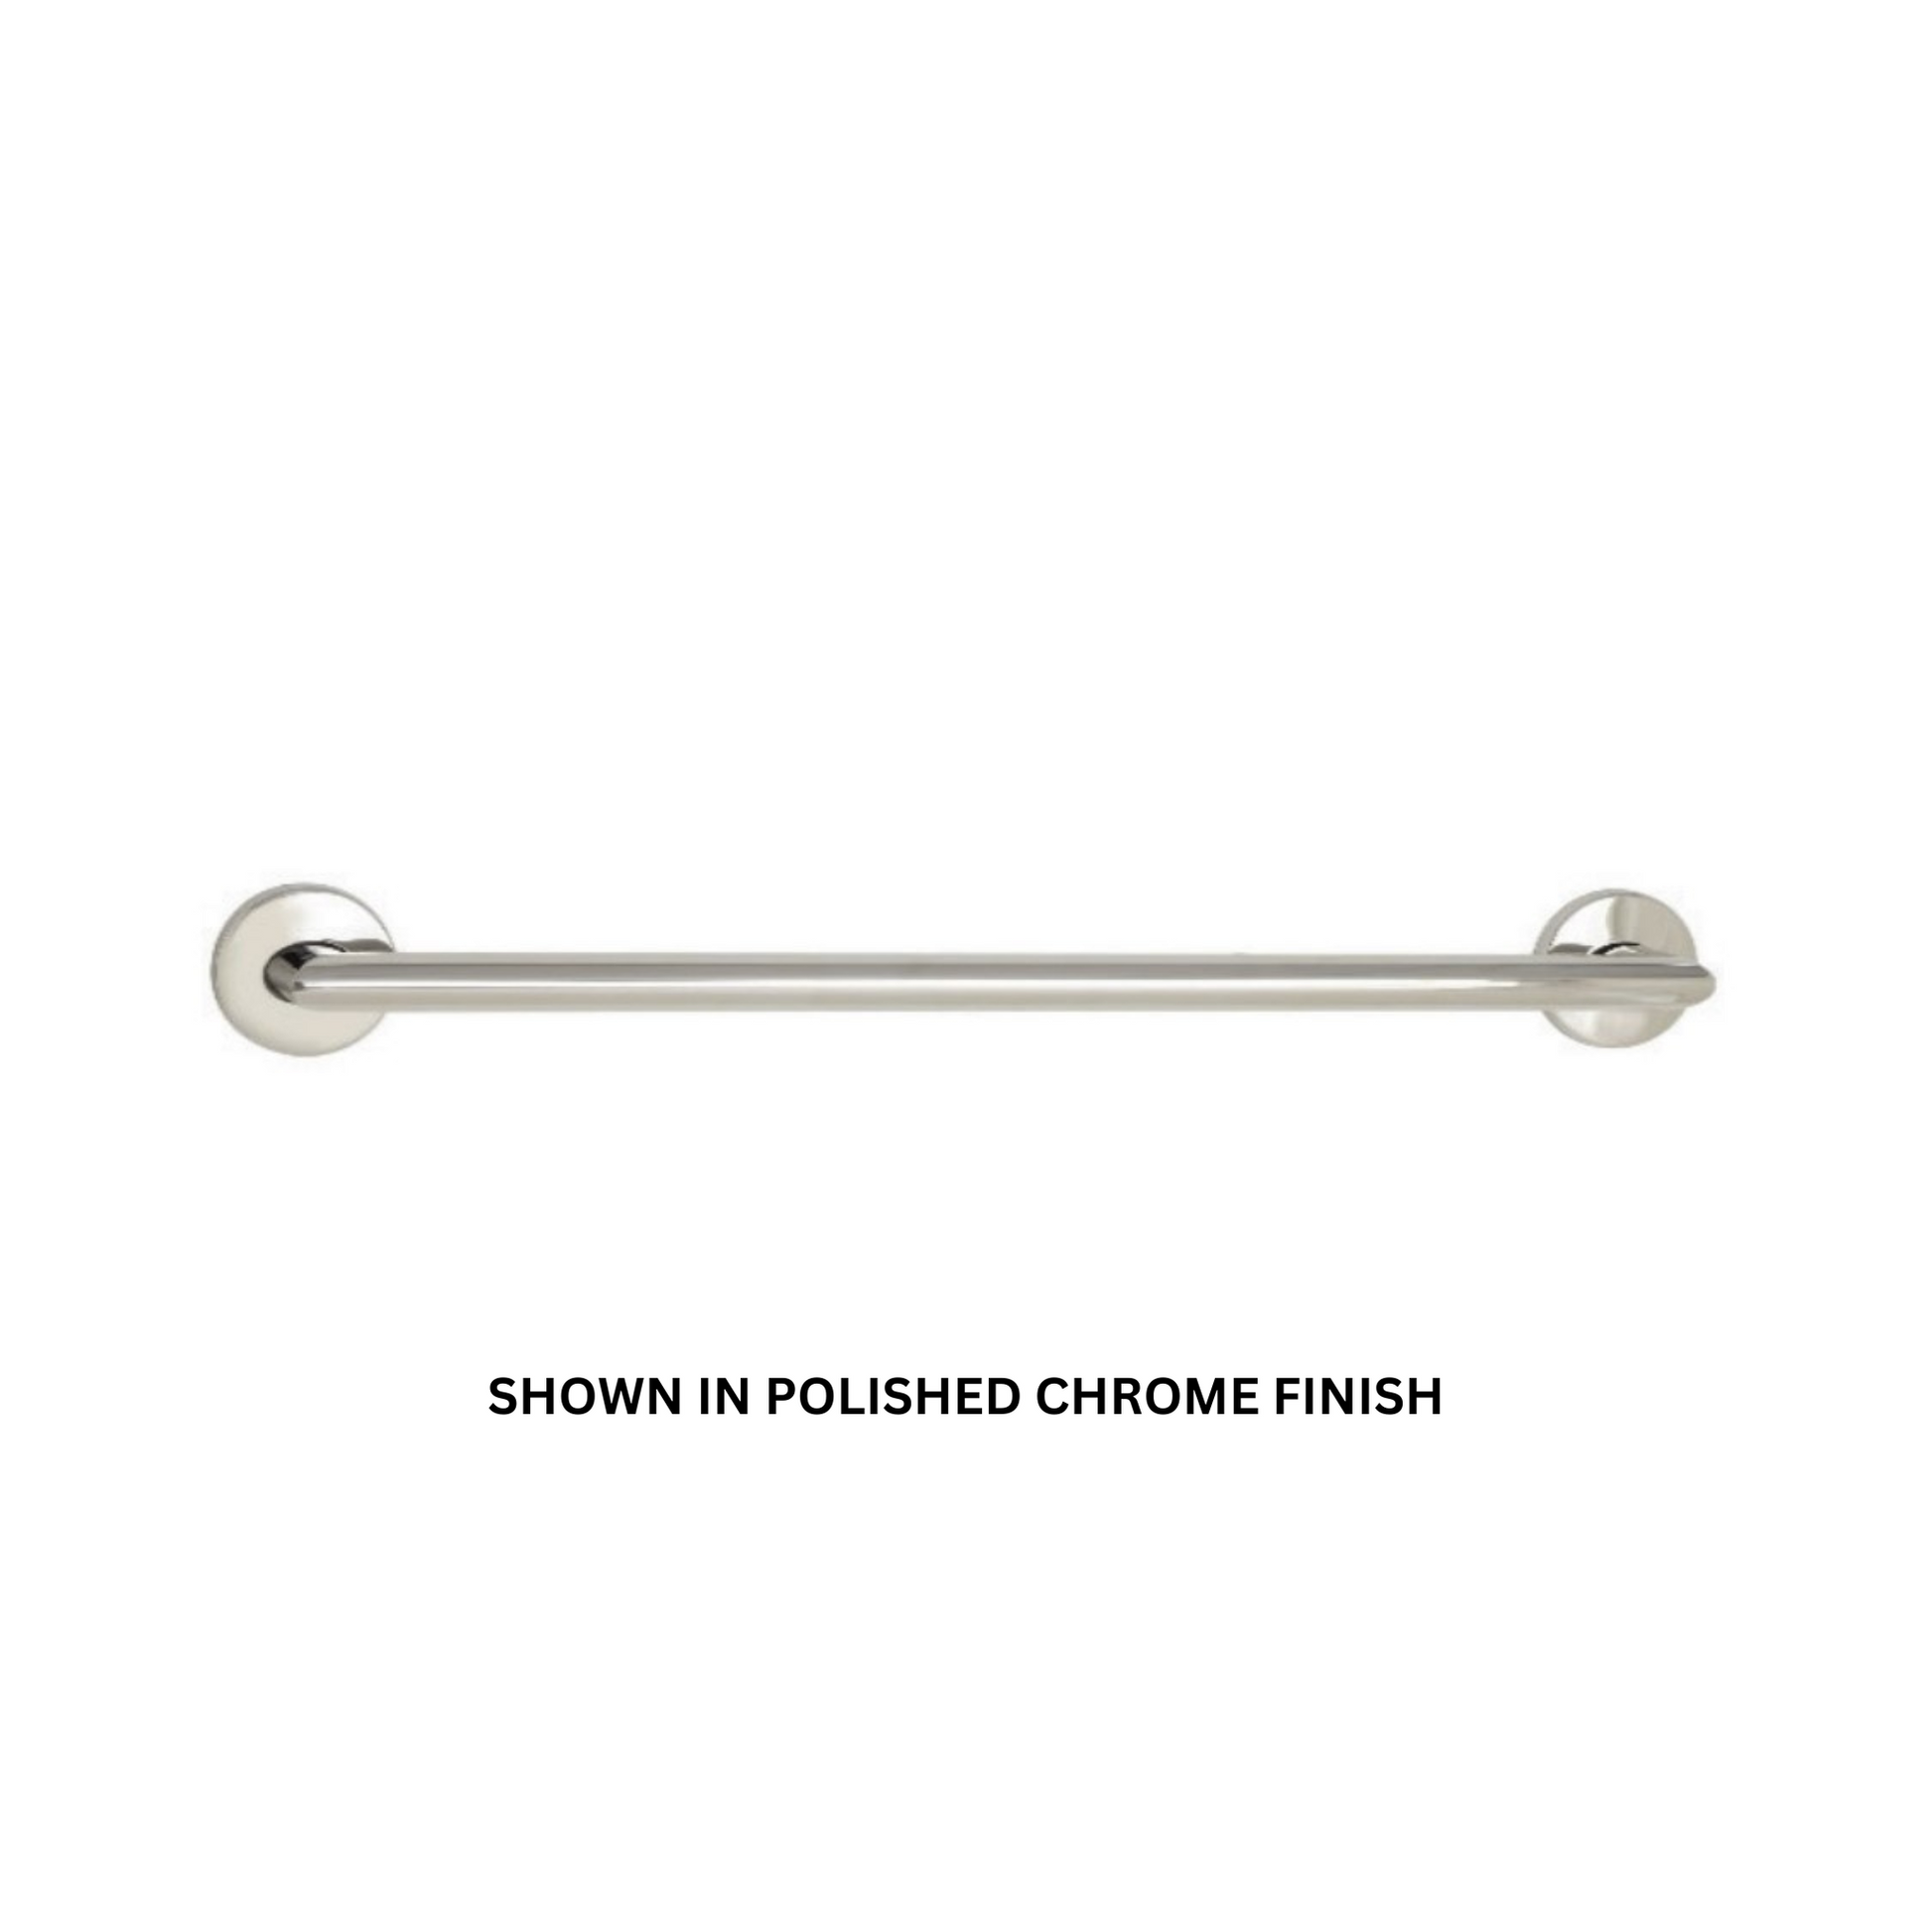 Seachrome Coronado 48" Bronze Powder Coat 1.5" Concealed Flanges Oval Grab Bar With Mitered Corners